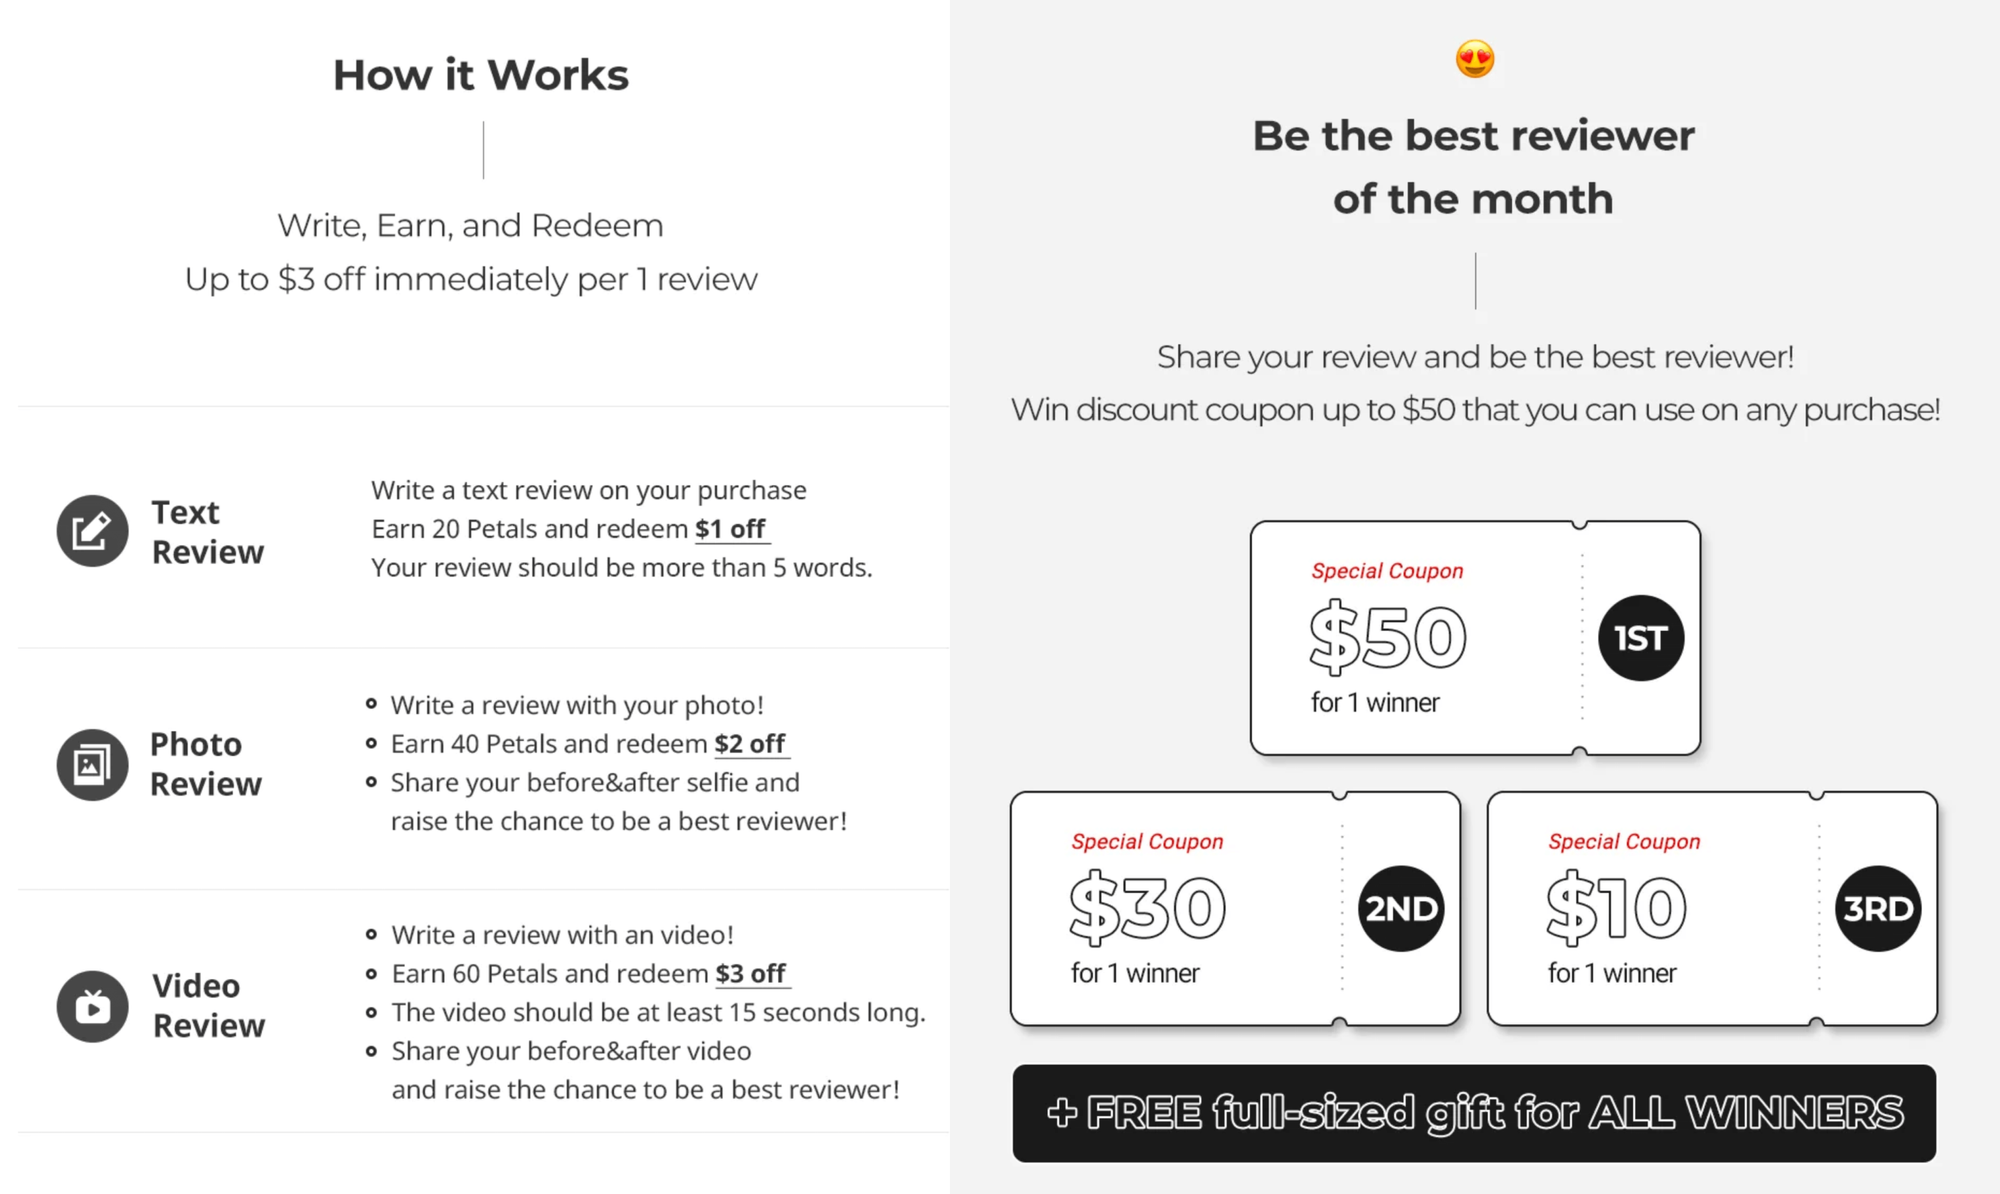 A screenshot of April Skin’s rewards program explainer page. The page explains how the program works: Write, earn, and redeem. Up to $3 off immediately per one review. Text Review: write a text review on your purchase. Earn 20 petals and redeem $1 off. Your review should be more than 5 words. Photo Review: write a review with your photo! Earn 40 petals and redeem $2 off. Share your before and after selfies and raise the chance to be a best reviewer! Video Review: write a review with a video! or in 60 petals and redeem three dollars off. The video should be at least 15 seconds long. Share your before and after video and raise the chance to be a best reviewer! Best Reviewer of the Month: Share your review and be the best reviewer! Win a discount coupon of up to $50 that you can use on any purchase. Below that is a pyramid graphic showing the 1st, 2nd, and 3rd place reviewer rewards, which are a $50 coupon for 1 winner, a $30 coupon for 1 winner, a $10 coupon for 1 winner, and a free full-sized gift for all winners. 